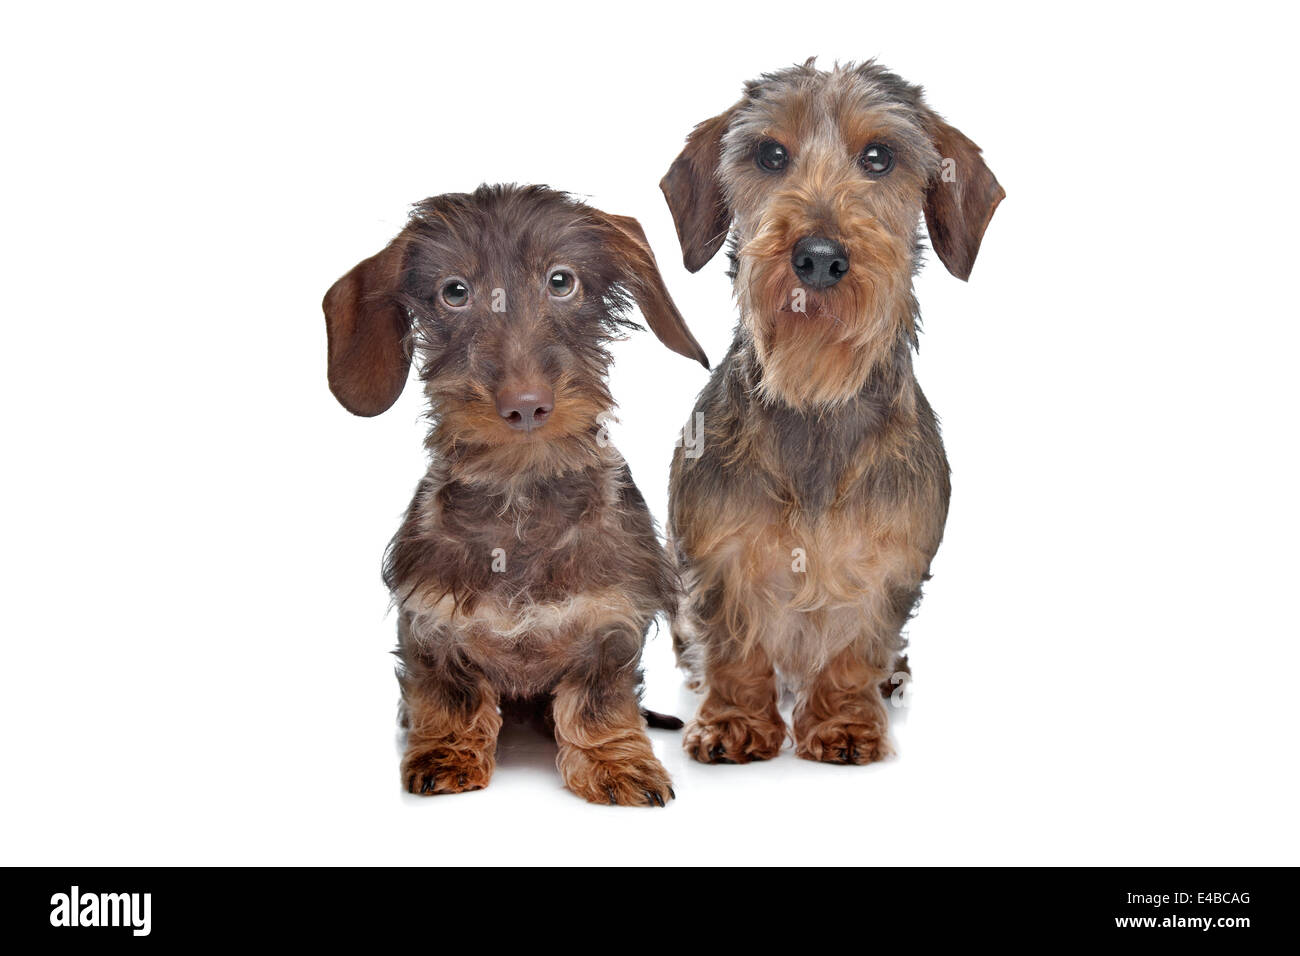 Two miniature Wire-haired dachshund dogs Stock Photo